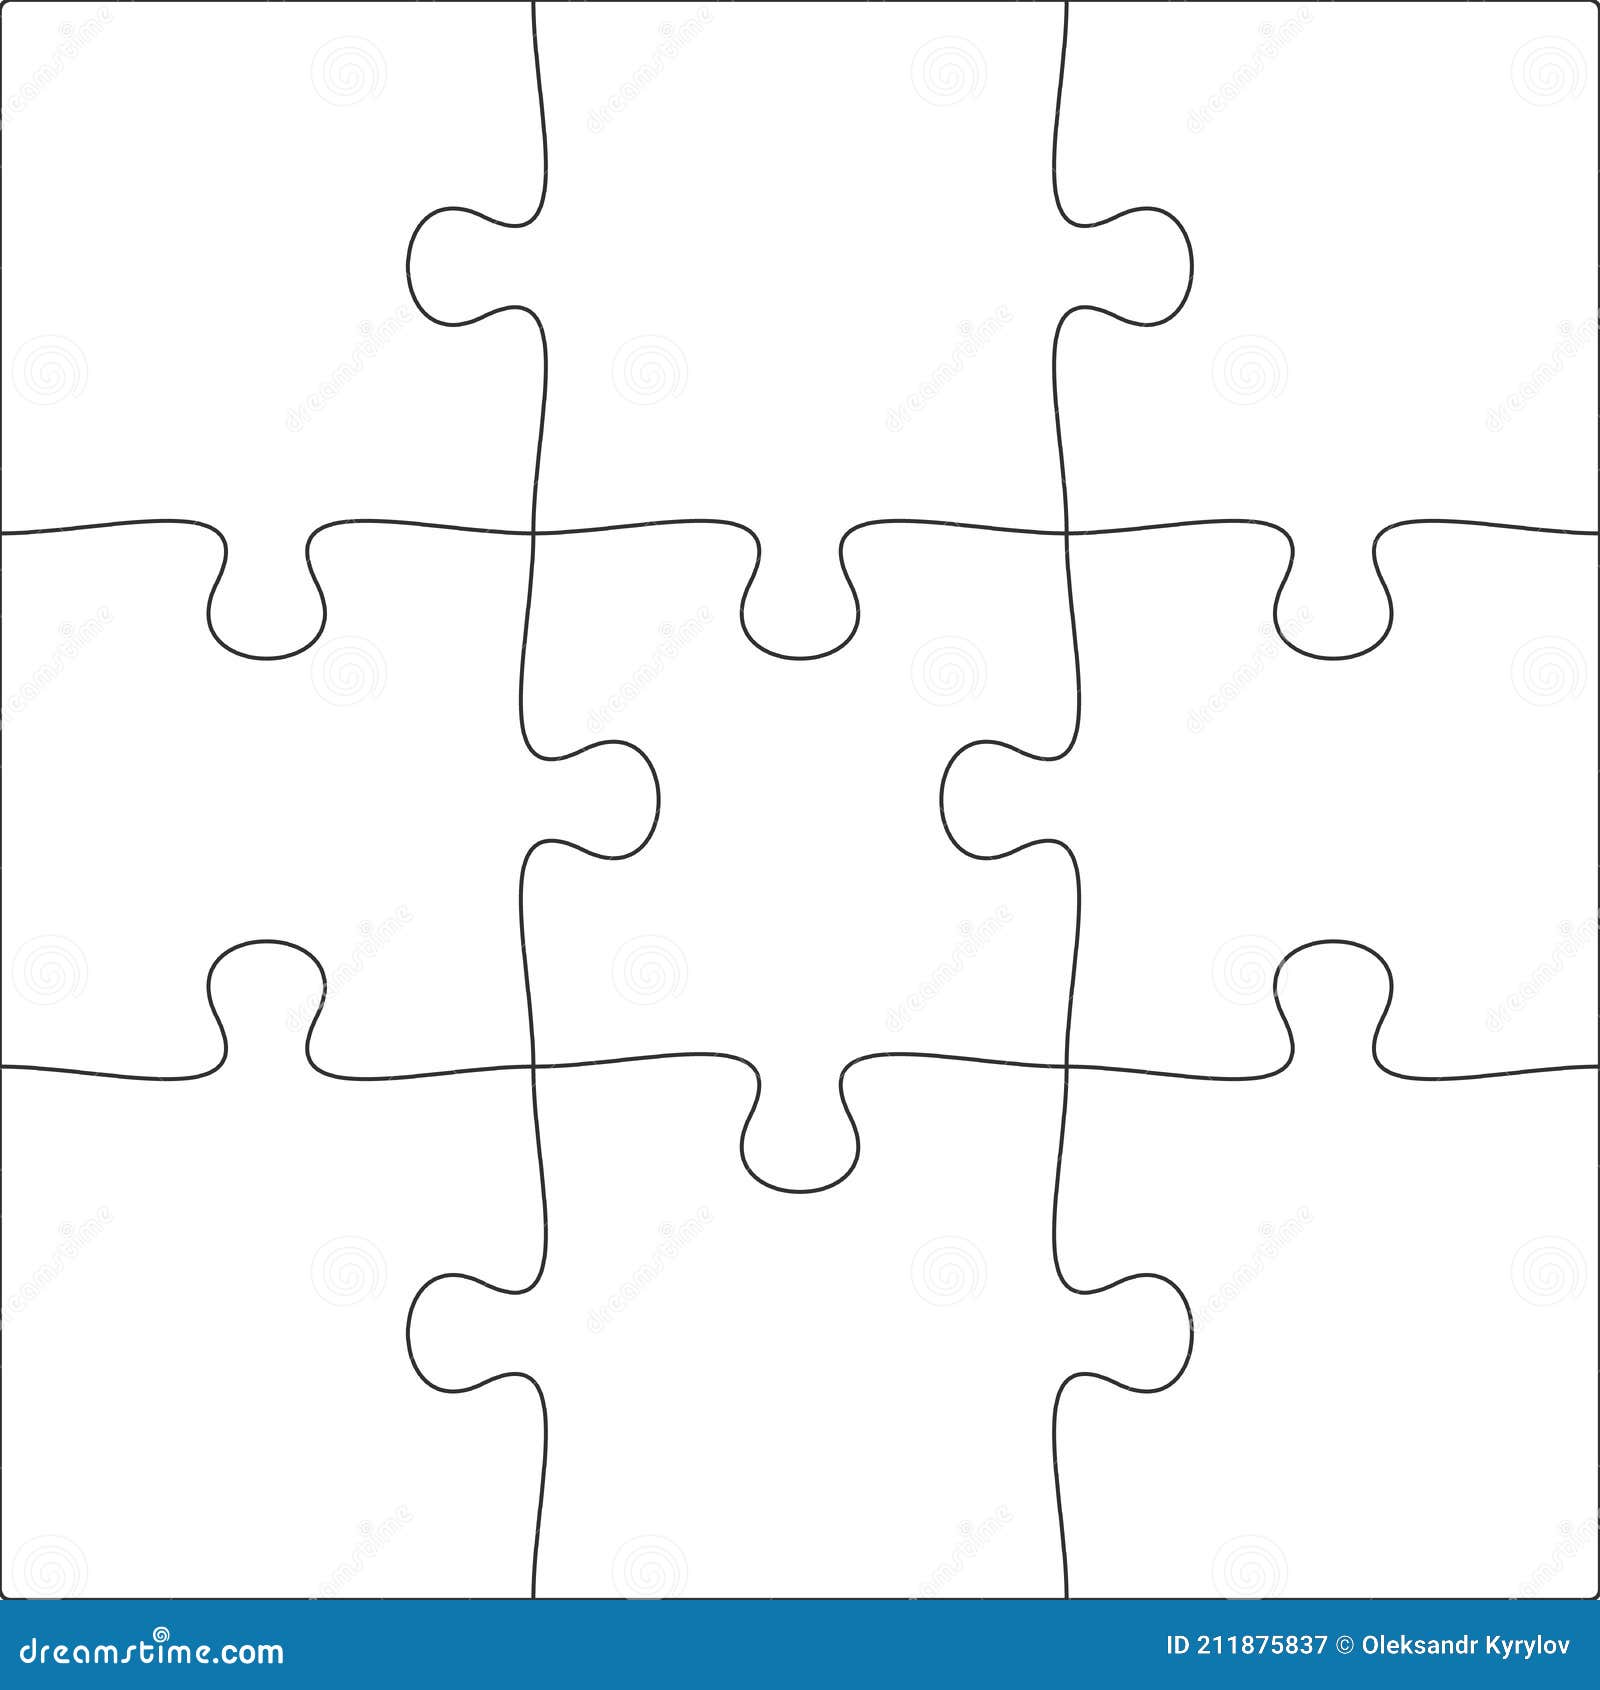 Jigsaw Puzzle Blank Template Background Lines. Every is a Single Vector Illustration Stock Vector - Illustration of blank, pattern: 211875837